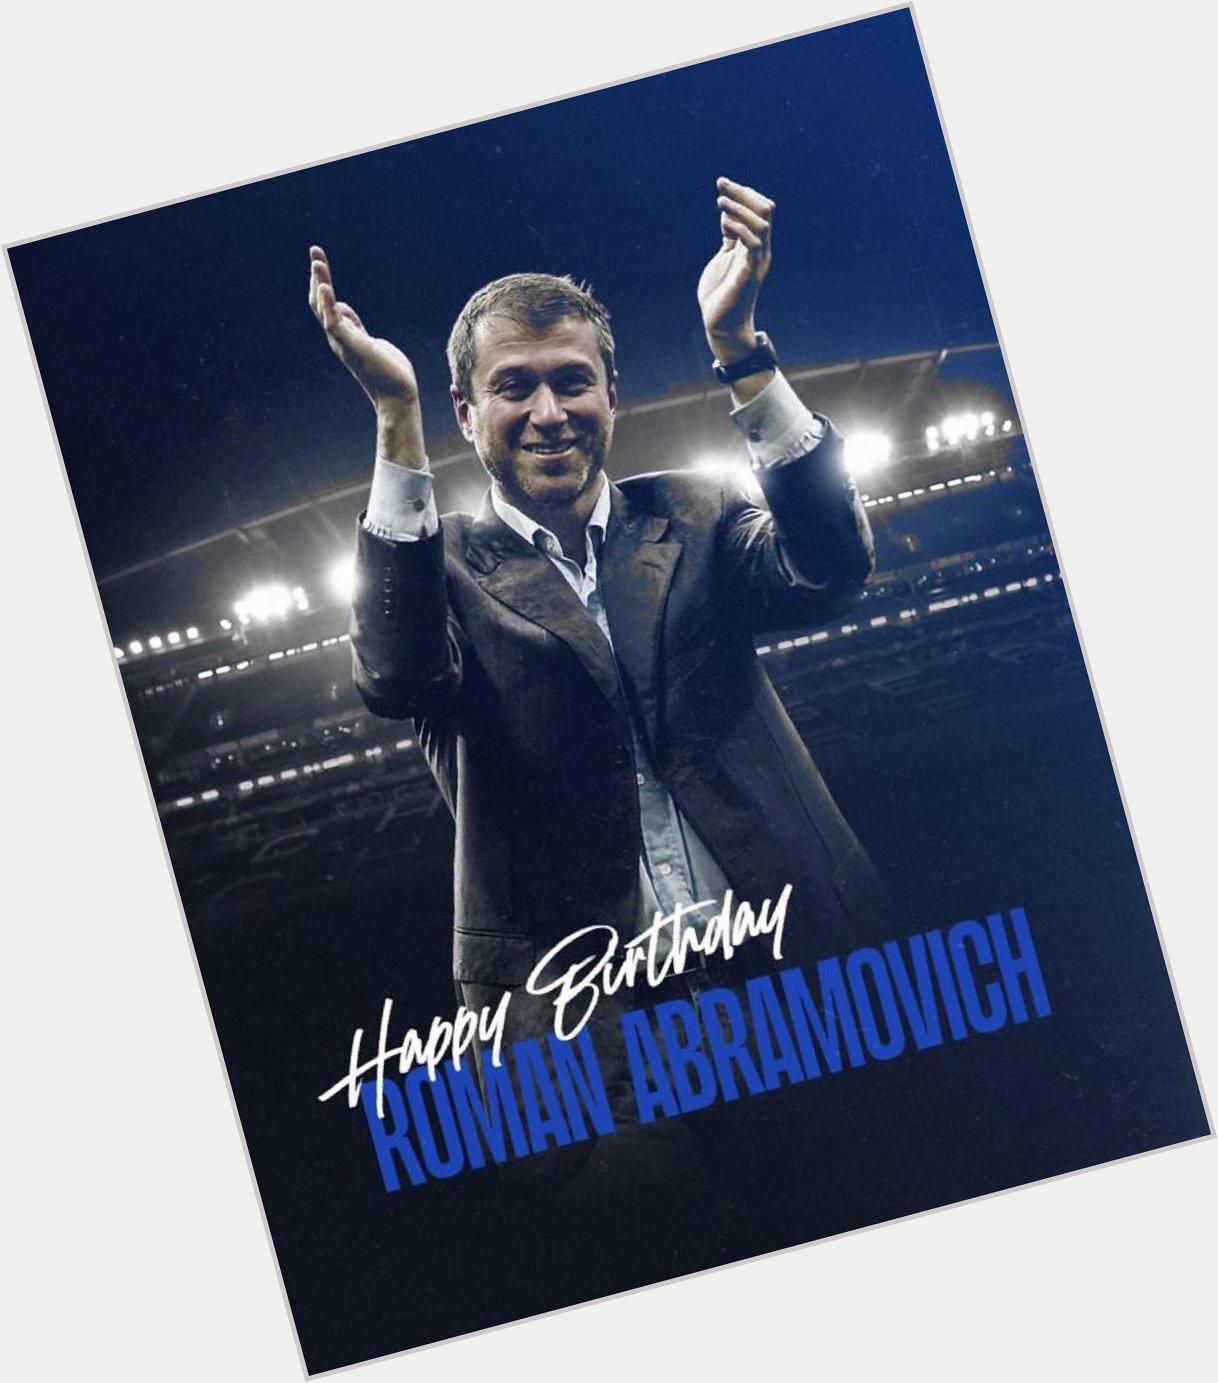 Happy birthday Roman Abramovich   the best football club owner in the world        